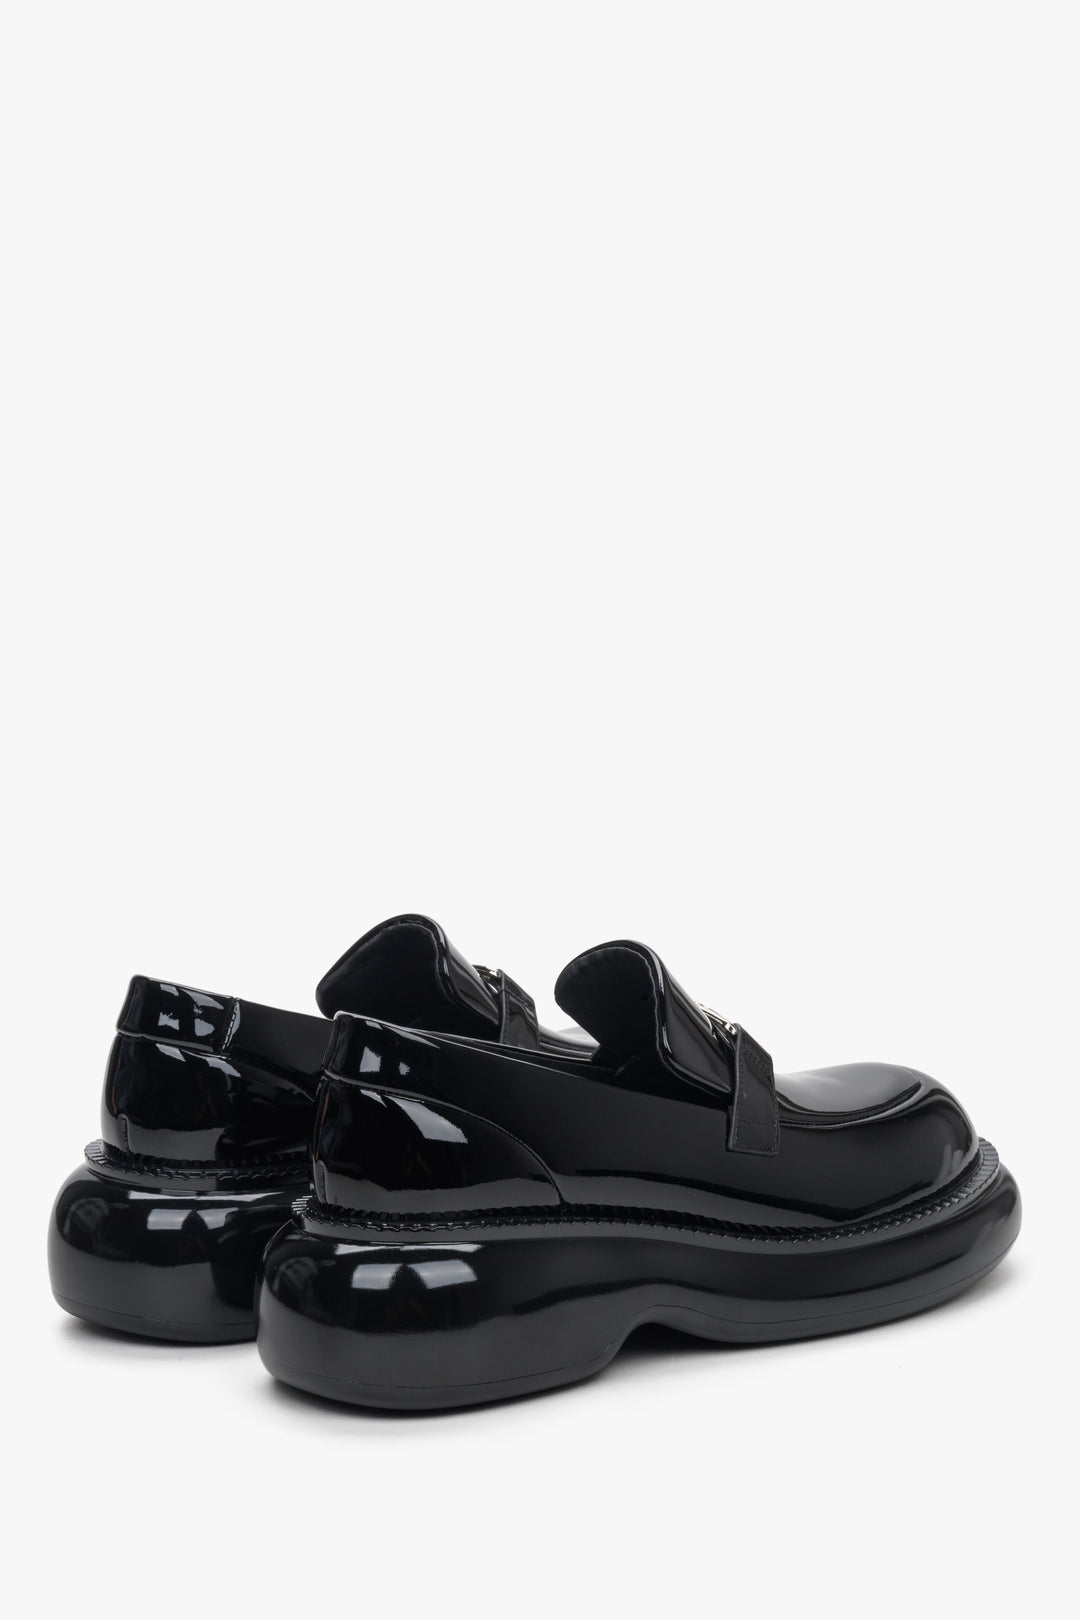 Women's black patent loafers Estro - a close-up on shoes' heel counter/